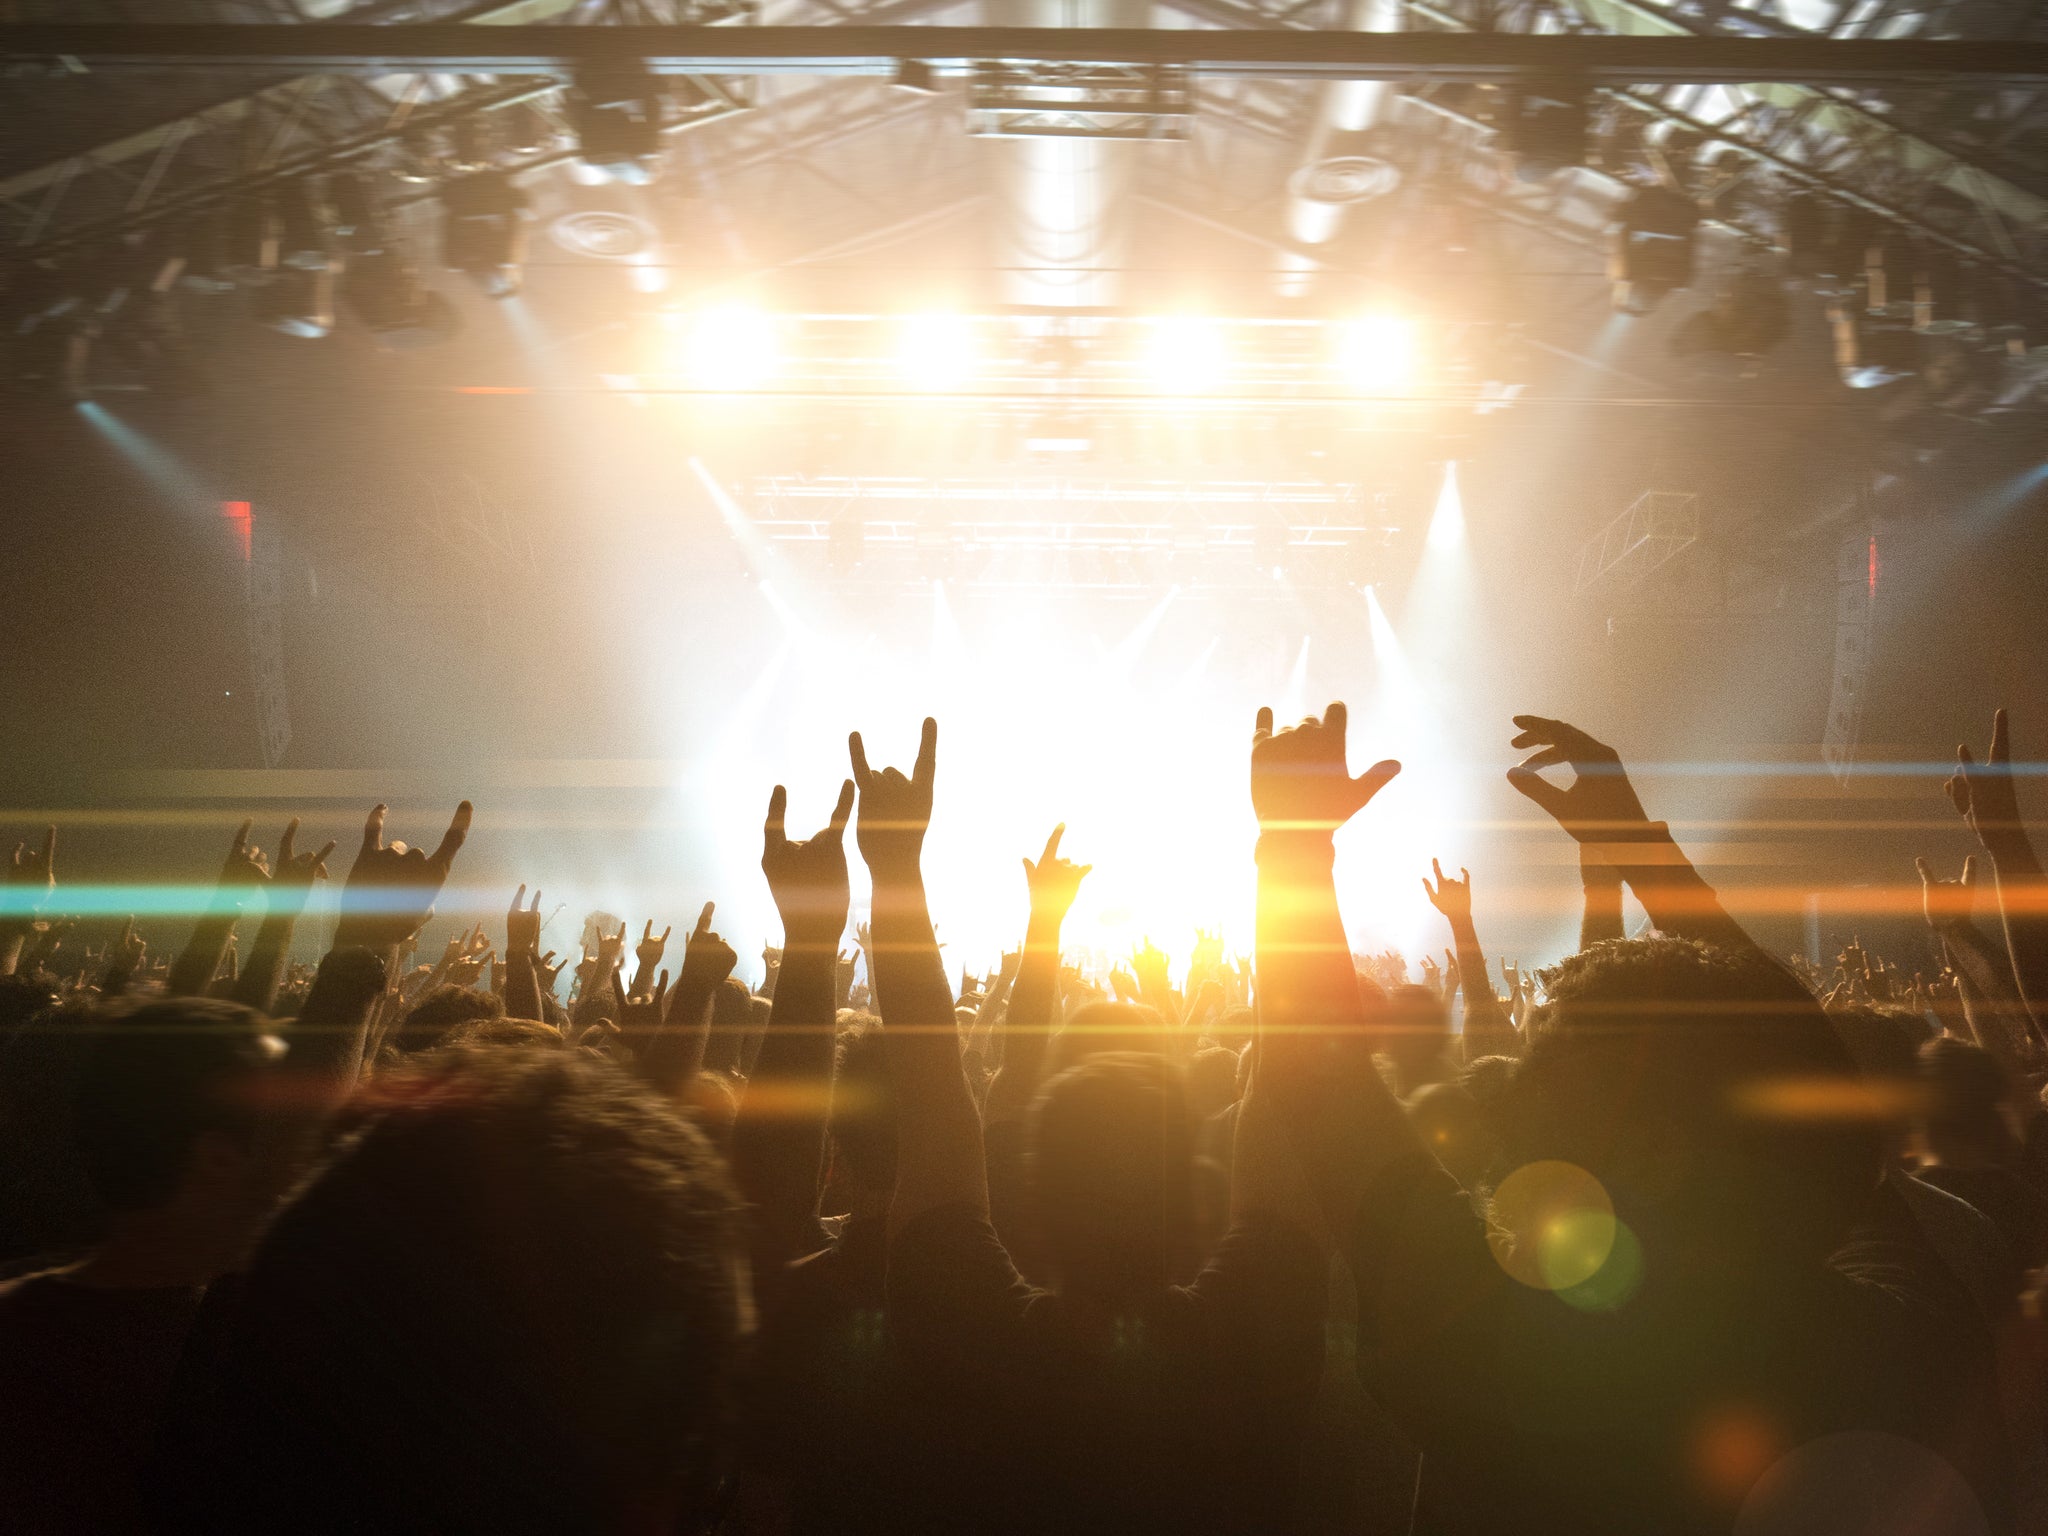 Teen Hearing Loss at Music Festivals - The Listening Stack